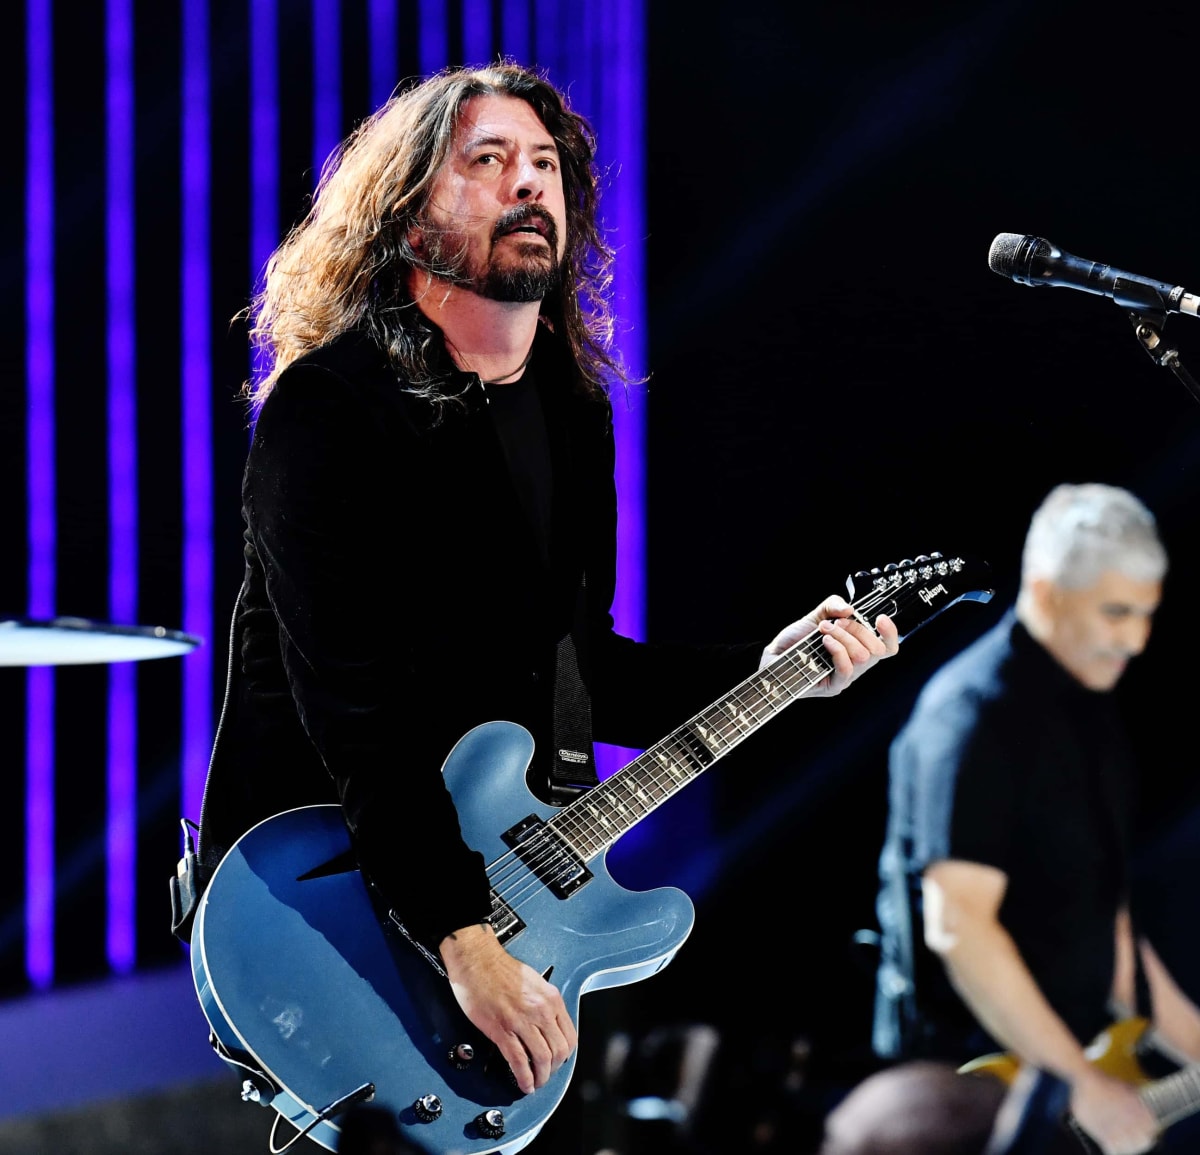 <p>Dave Grohl accidentally fell off the stage at a Foo Fighters concert in Sweden in 2015. Instantly recognizing there was a problem, Dave was able to inform the crowd that he had suffered a leg fracture. He discovered that his ankle was dislocated, and he went back to the stage after having it realigned. Seated with his leg raised and his ankle restrained by a paramedic, Dave completed the rest of the performance.</p>